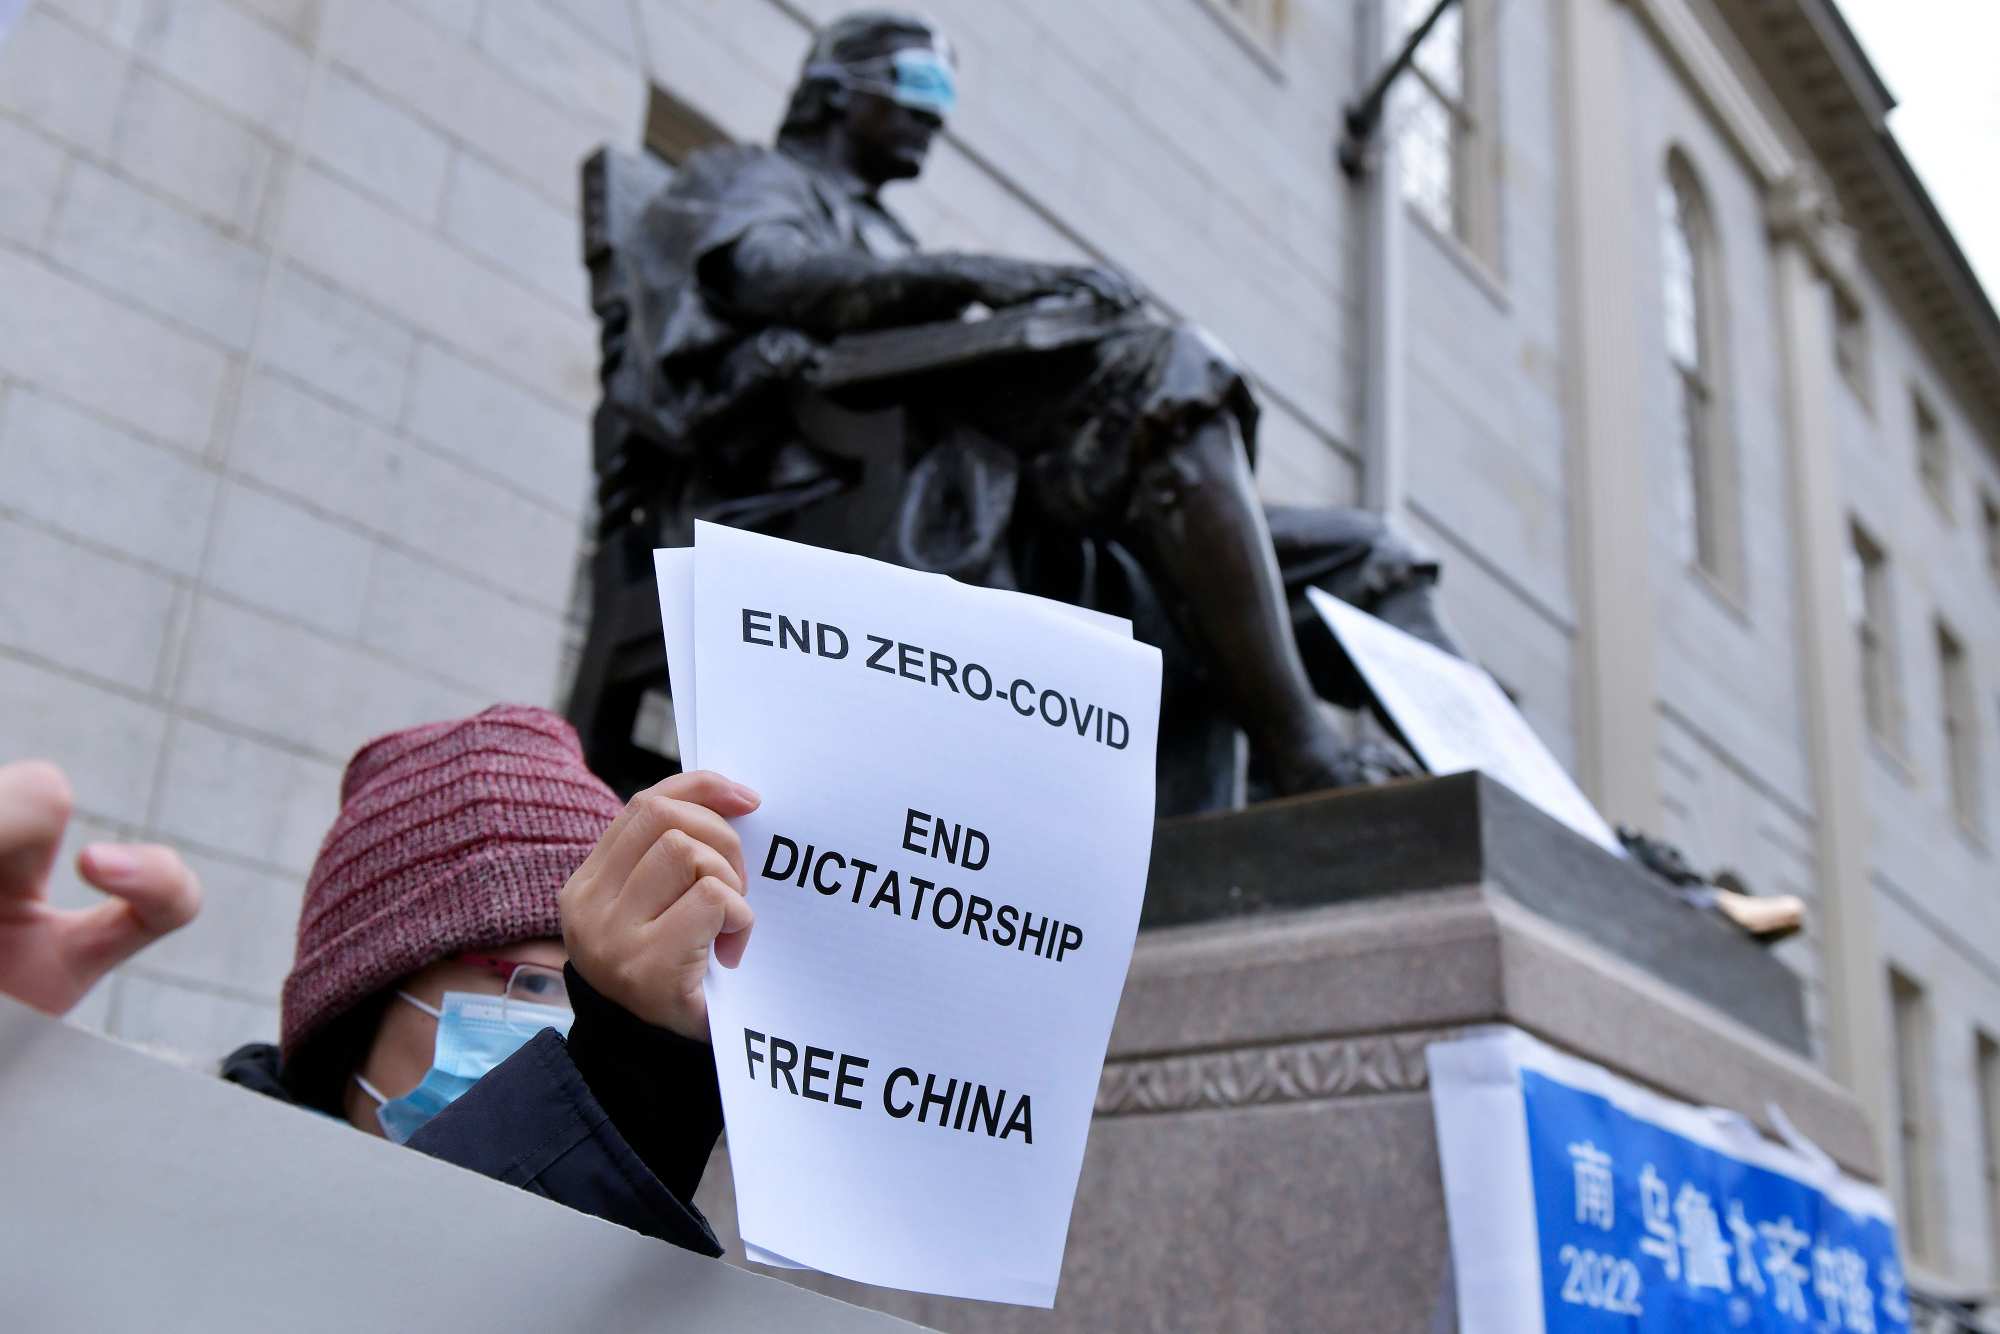 Demonstrators work to put a mask over the eyes of the John Harvard Statue in Harvard Yard as dozens of students and faculty demonstrated against strict anti-virus measures in China on Tuesday. (Josh Reynolds/AP)